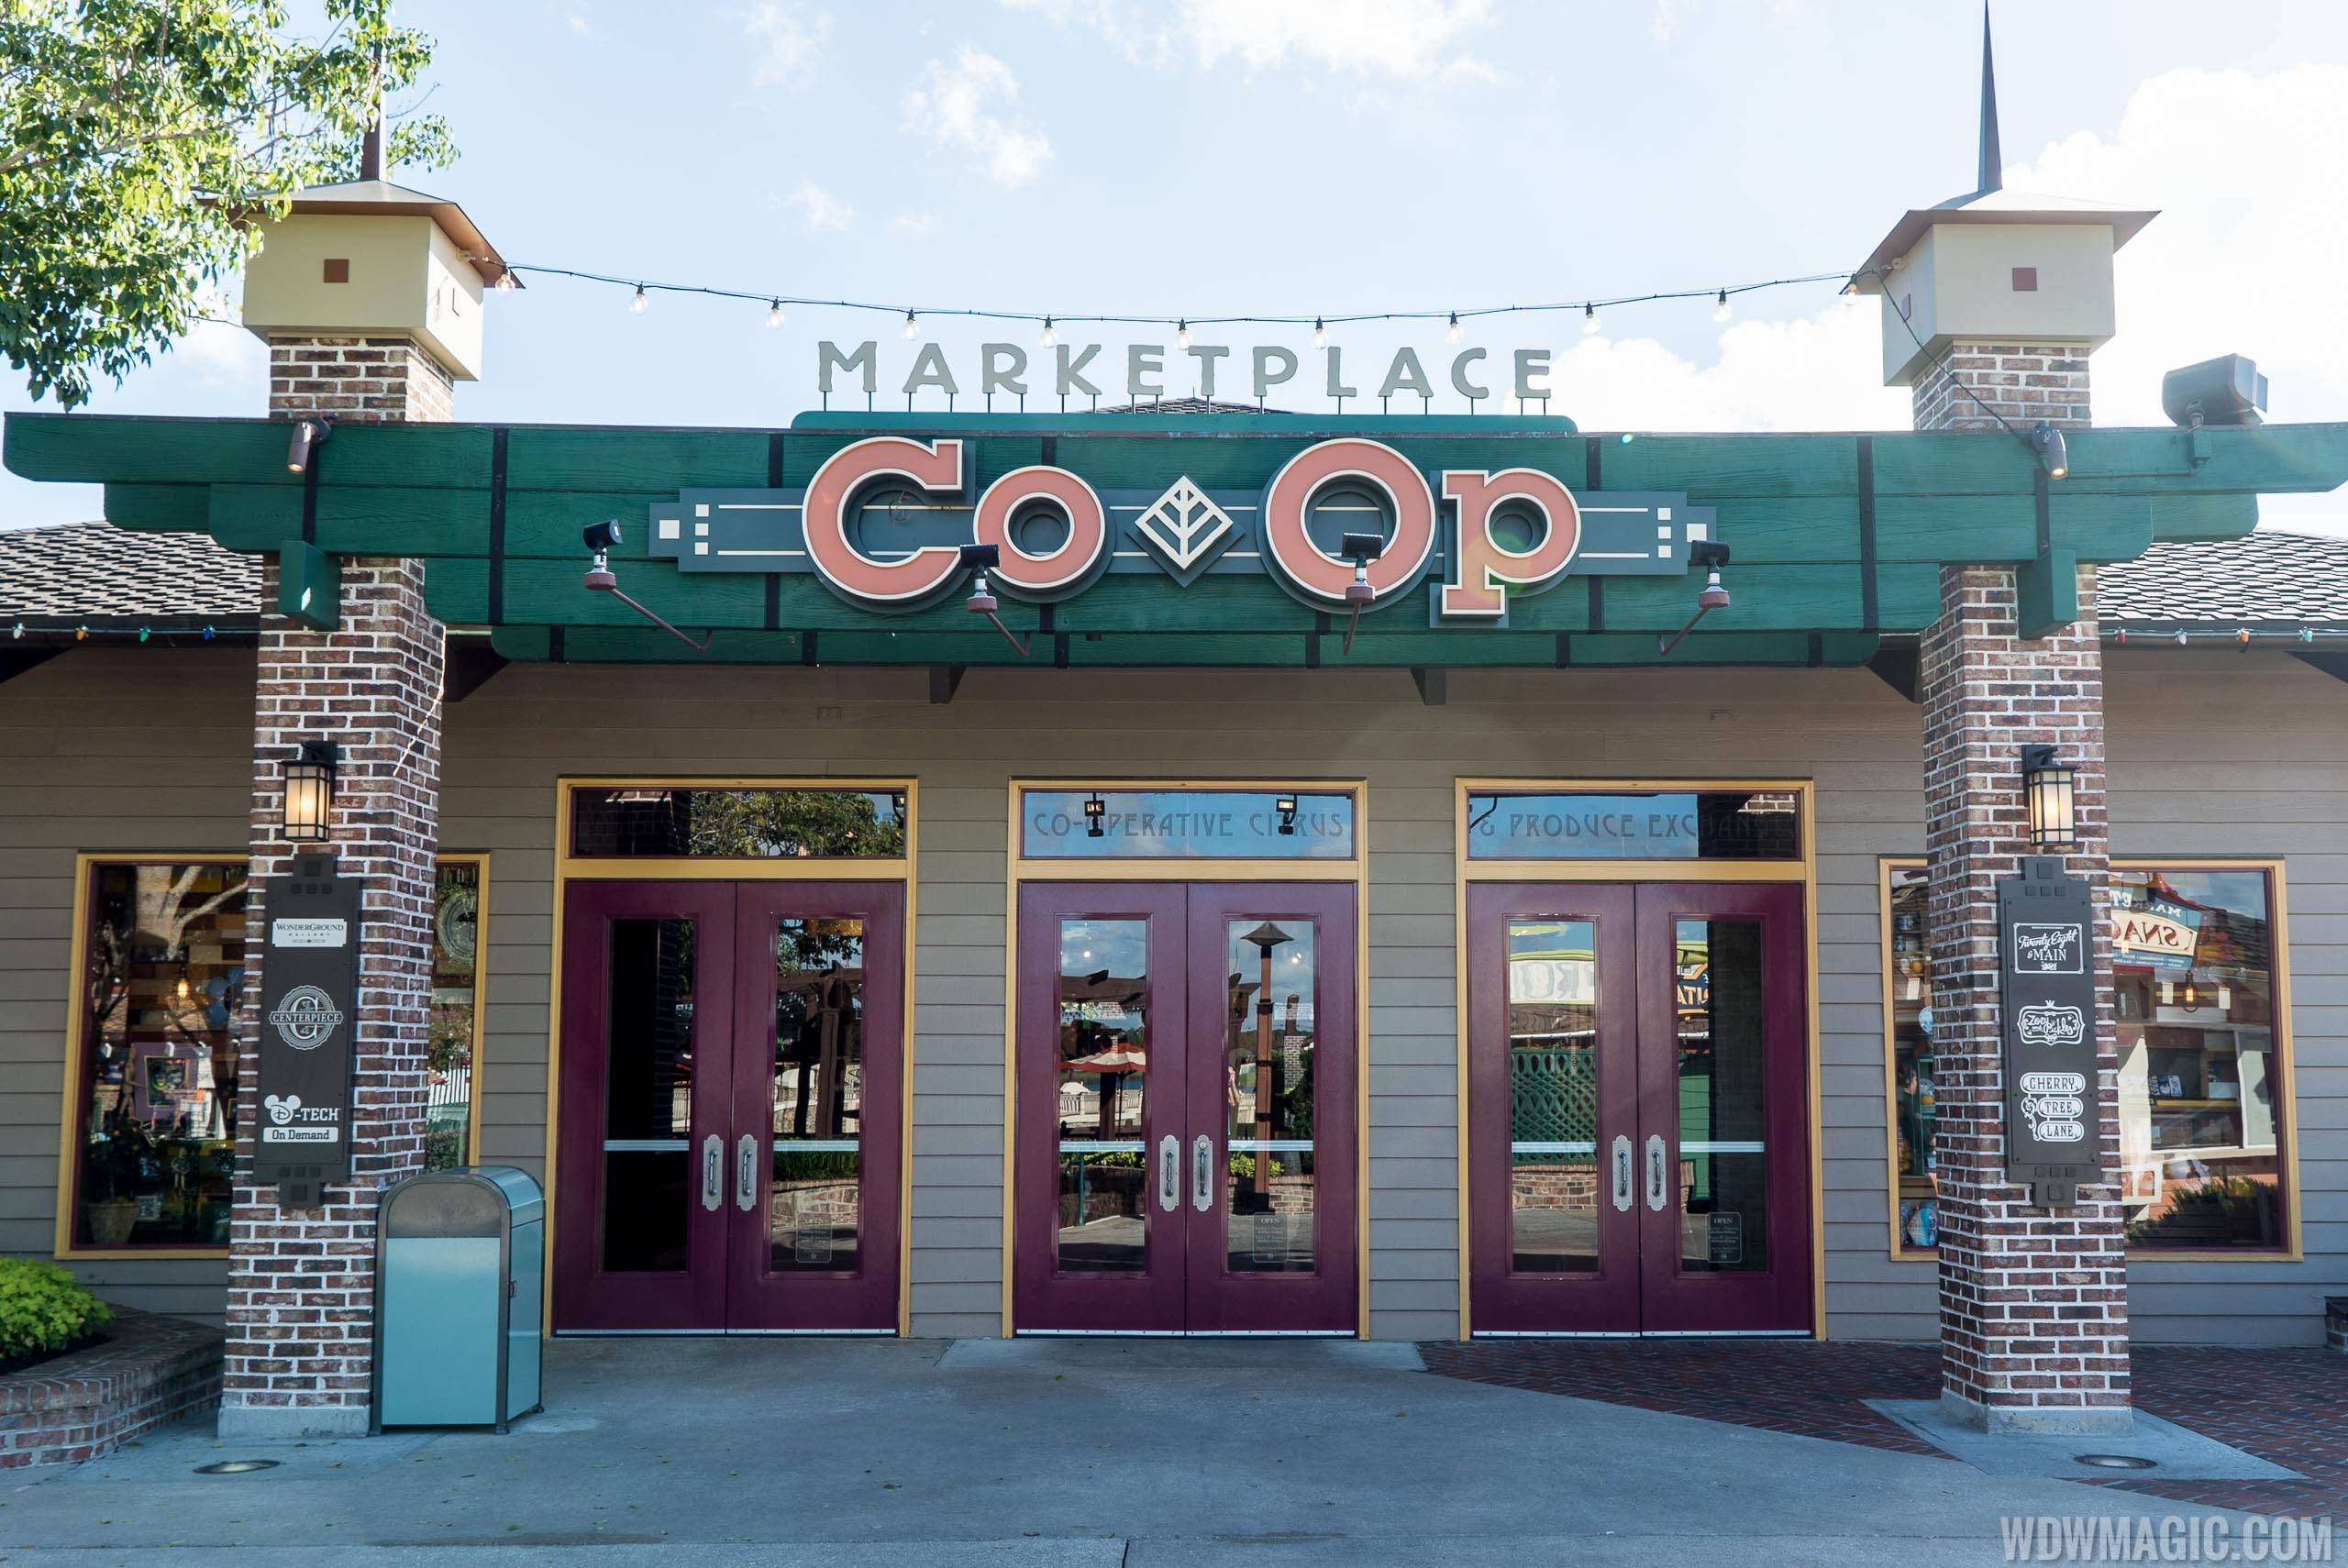 New Disney TAG shop coming to Marketplace Co-Op